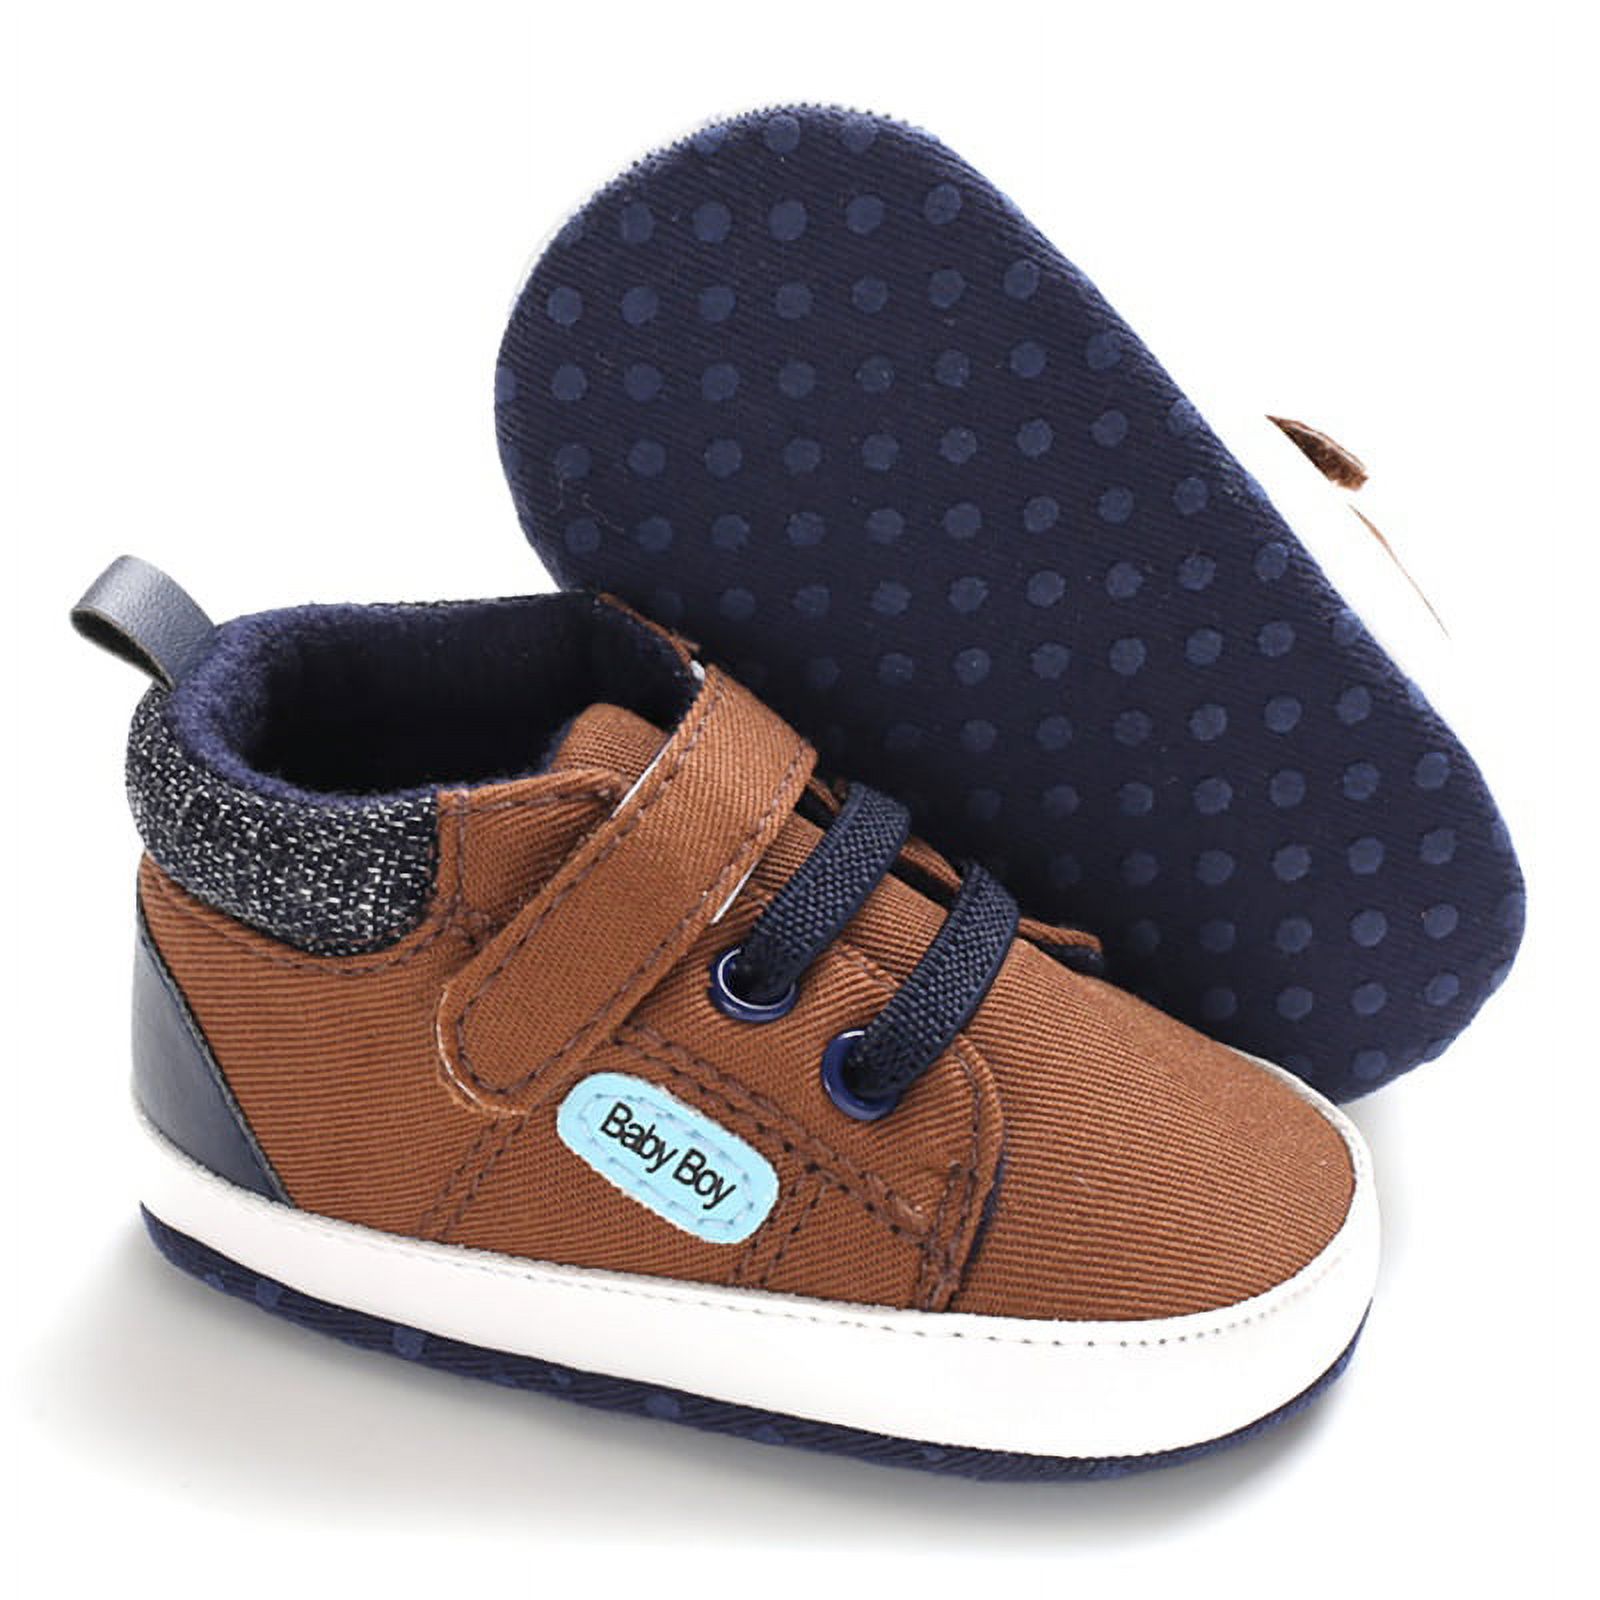 Infant Baby Boys Girls Canvas Toddler Sneakers Rubber Sole Non-Slip Candy Shoes First Walkers Prewalker Crib Shoes - image 3 of 8